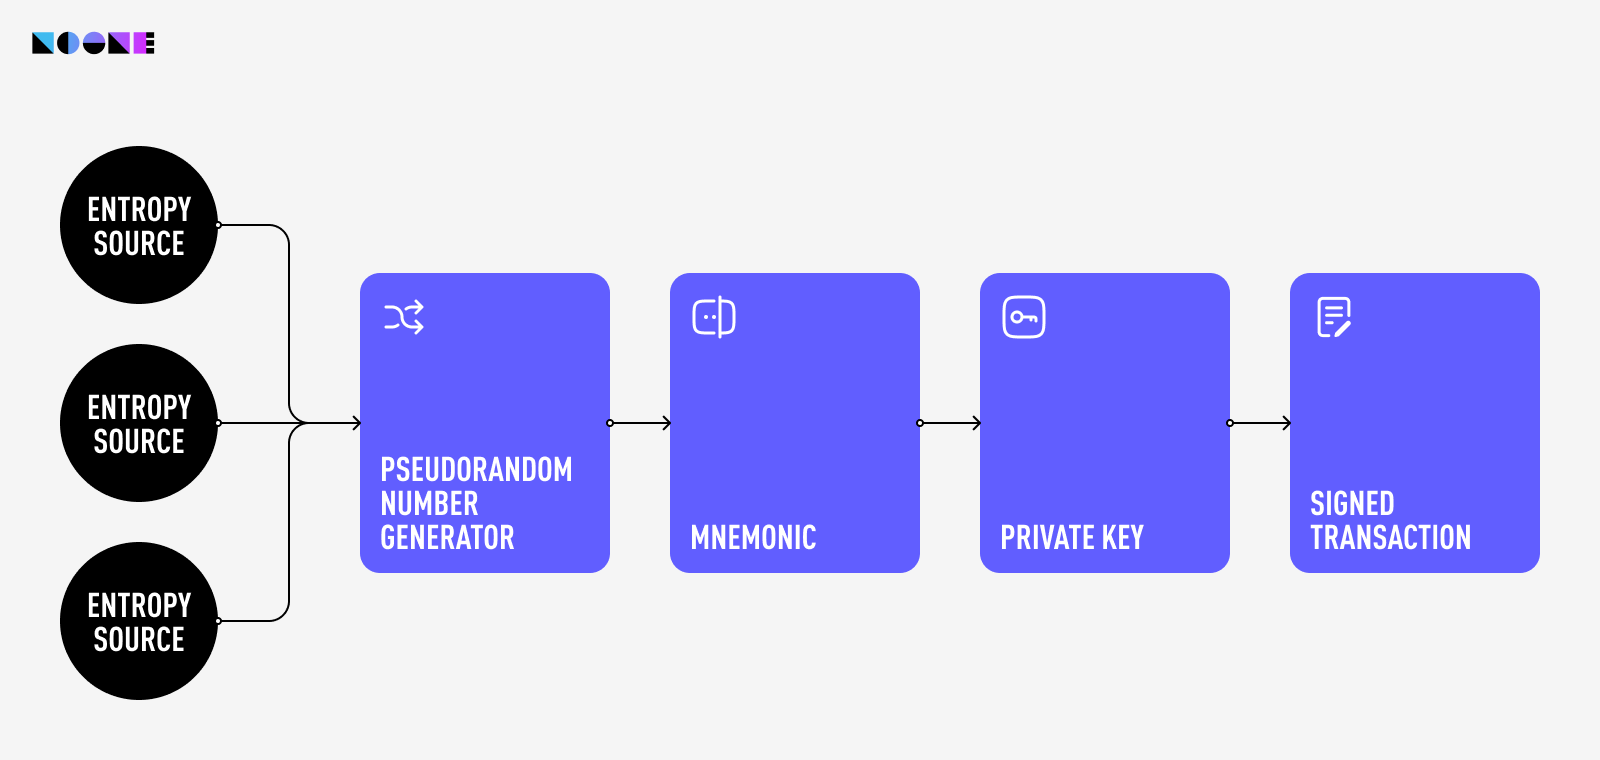 Private key generation simplified schematic.